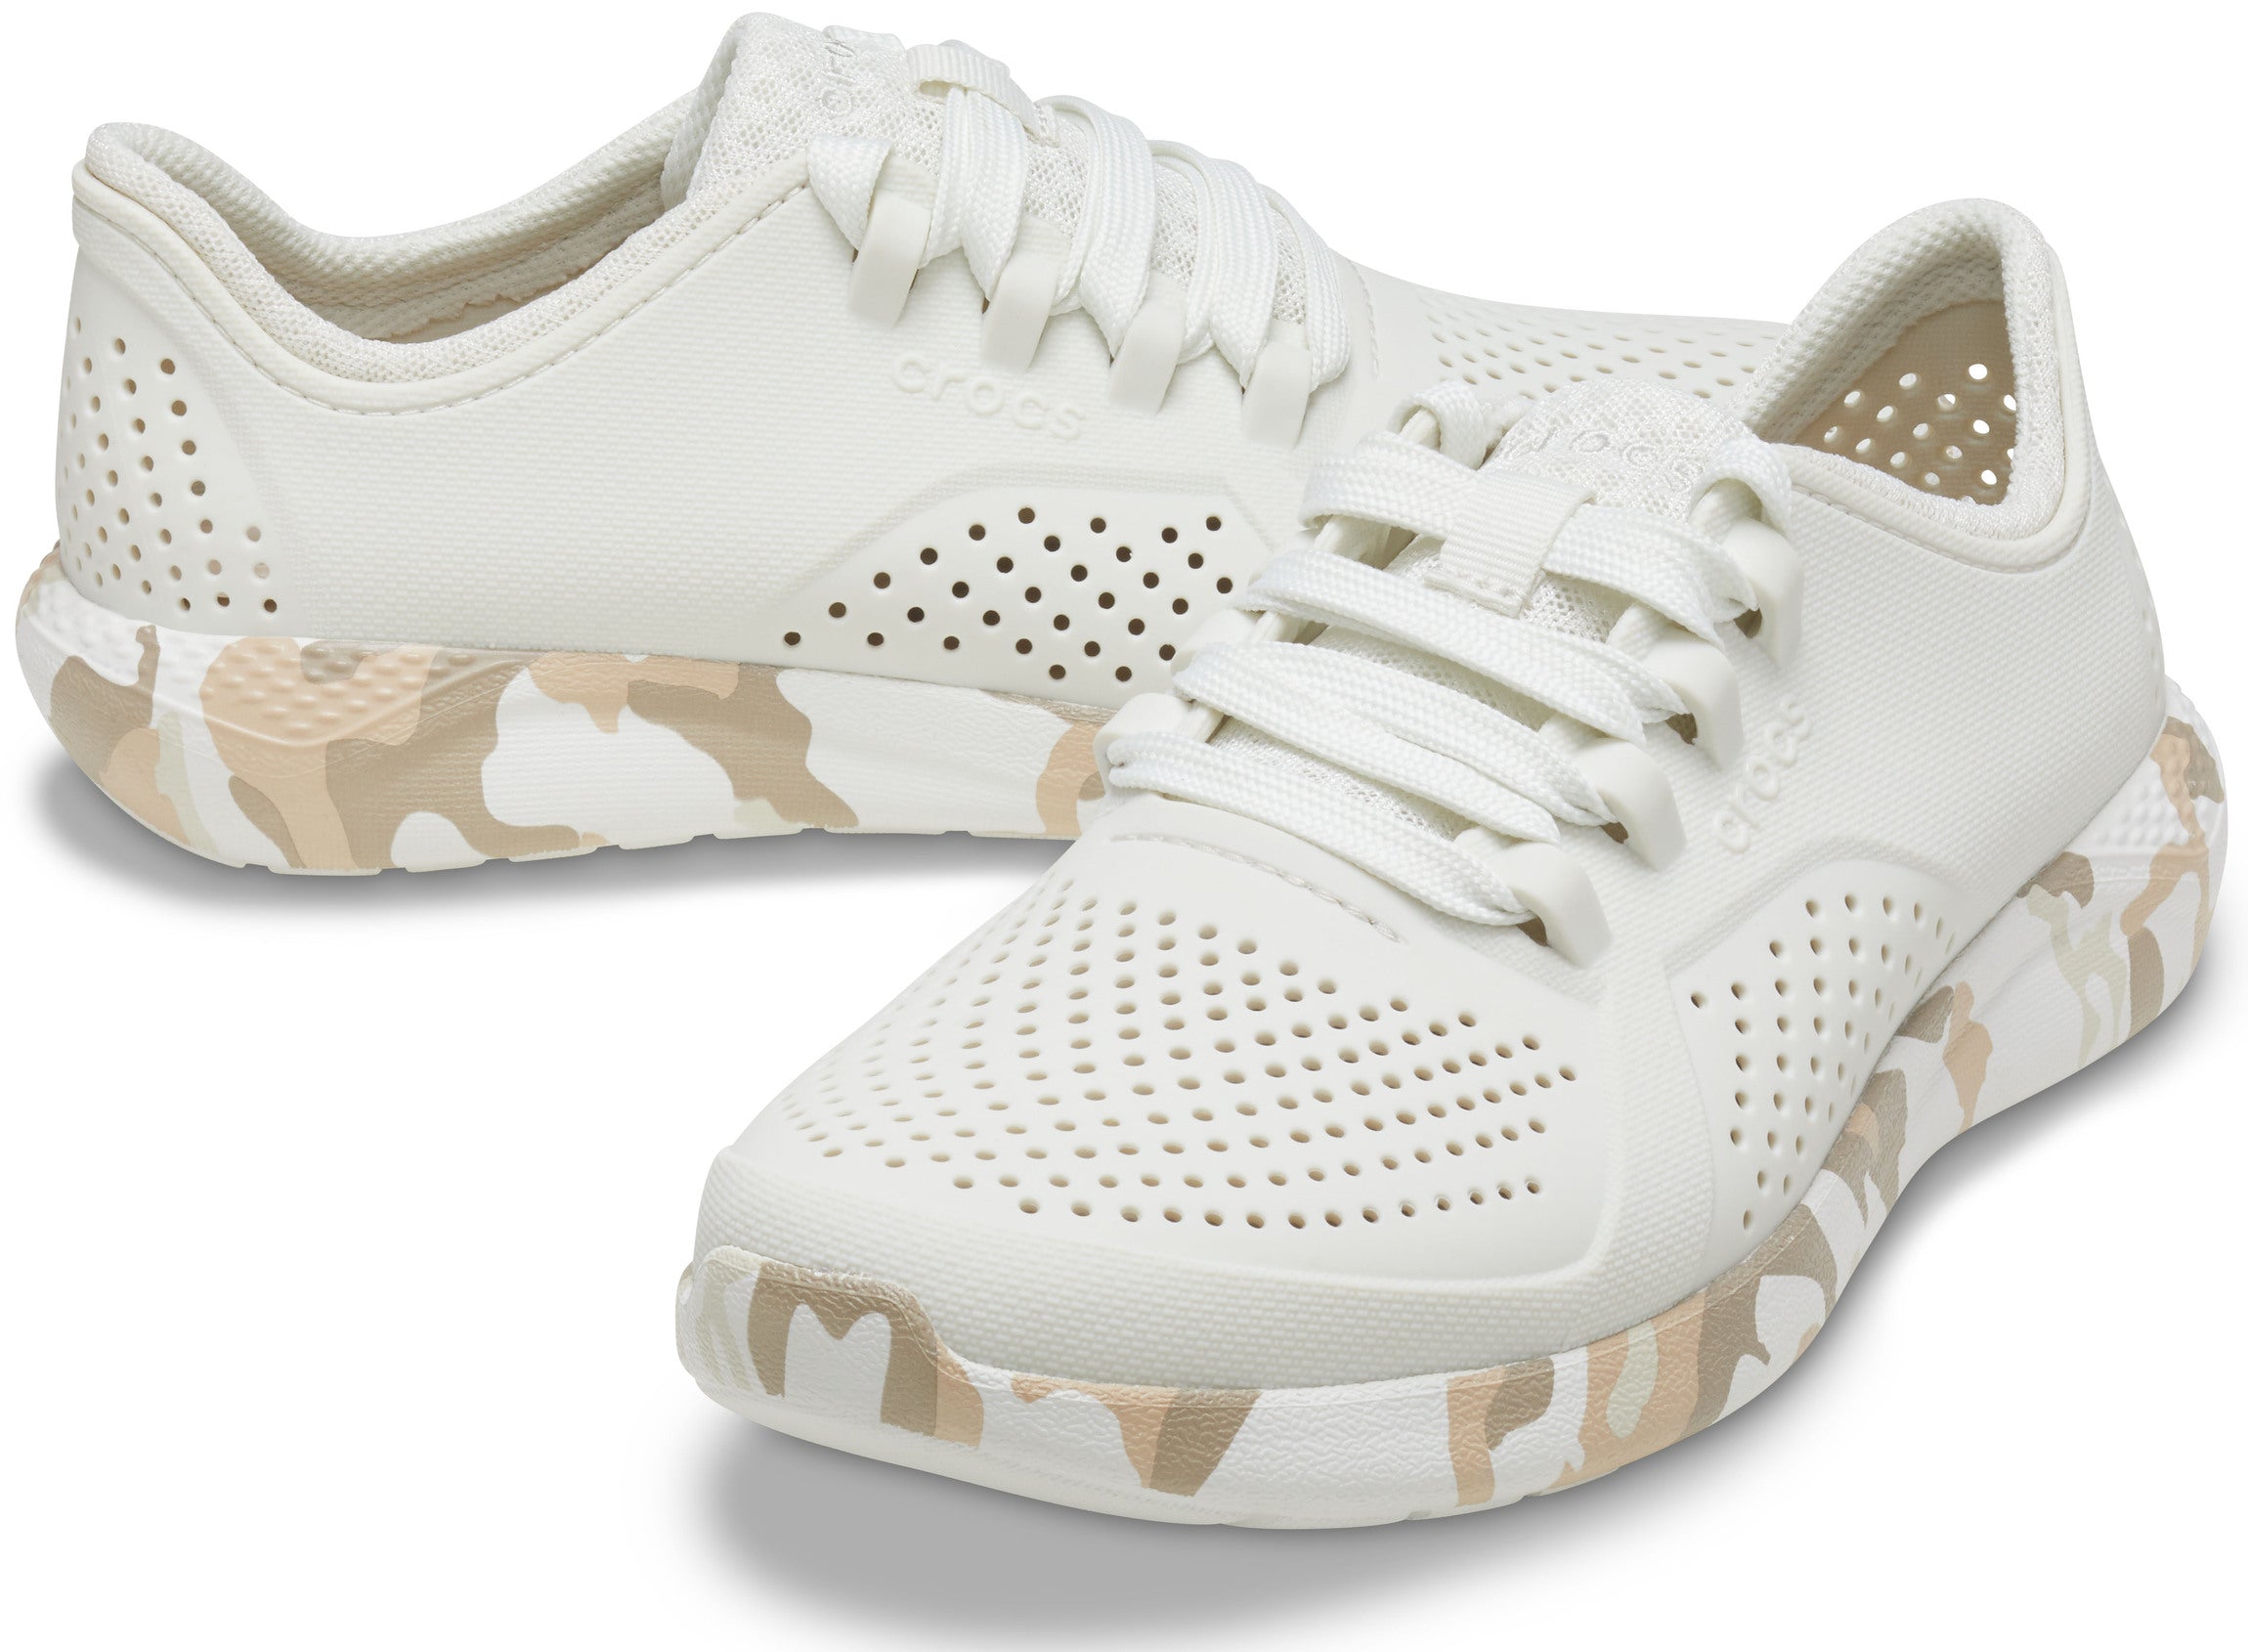 Women's LiteRide™ Printed Camo Pacer Almost white